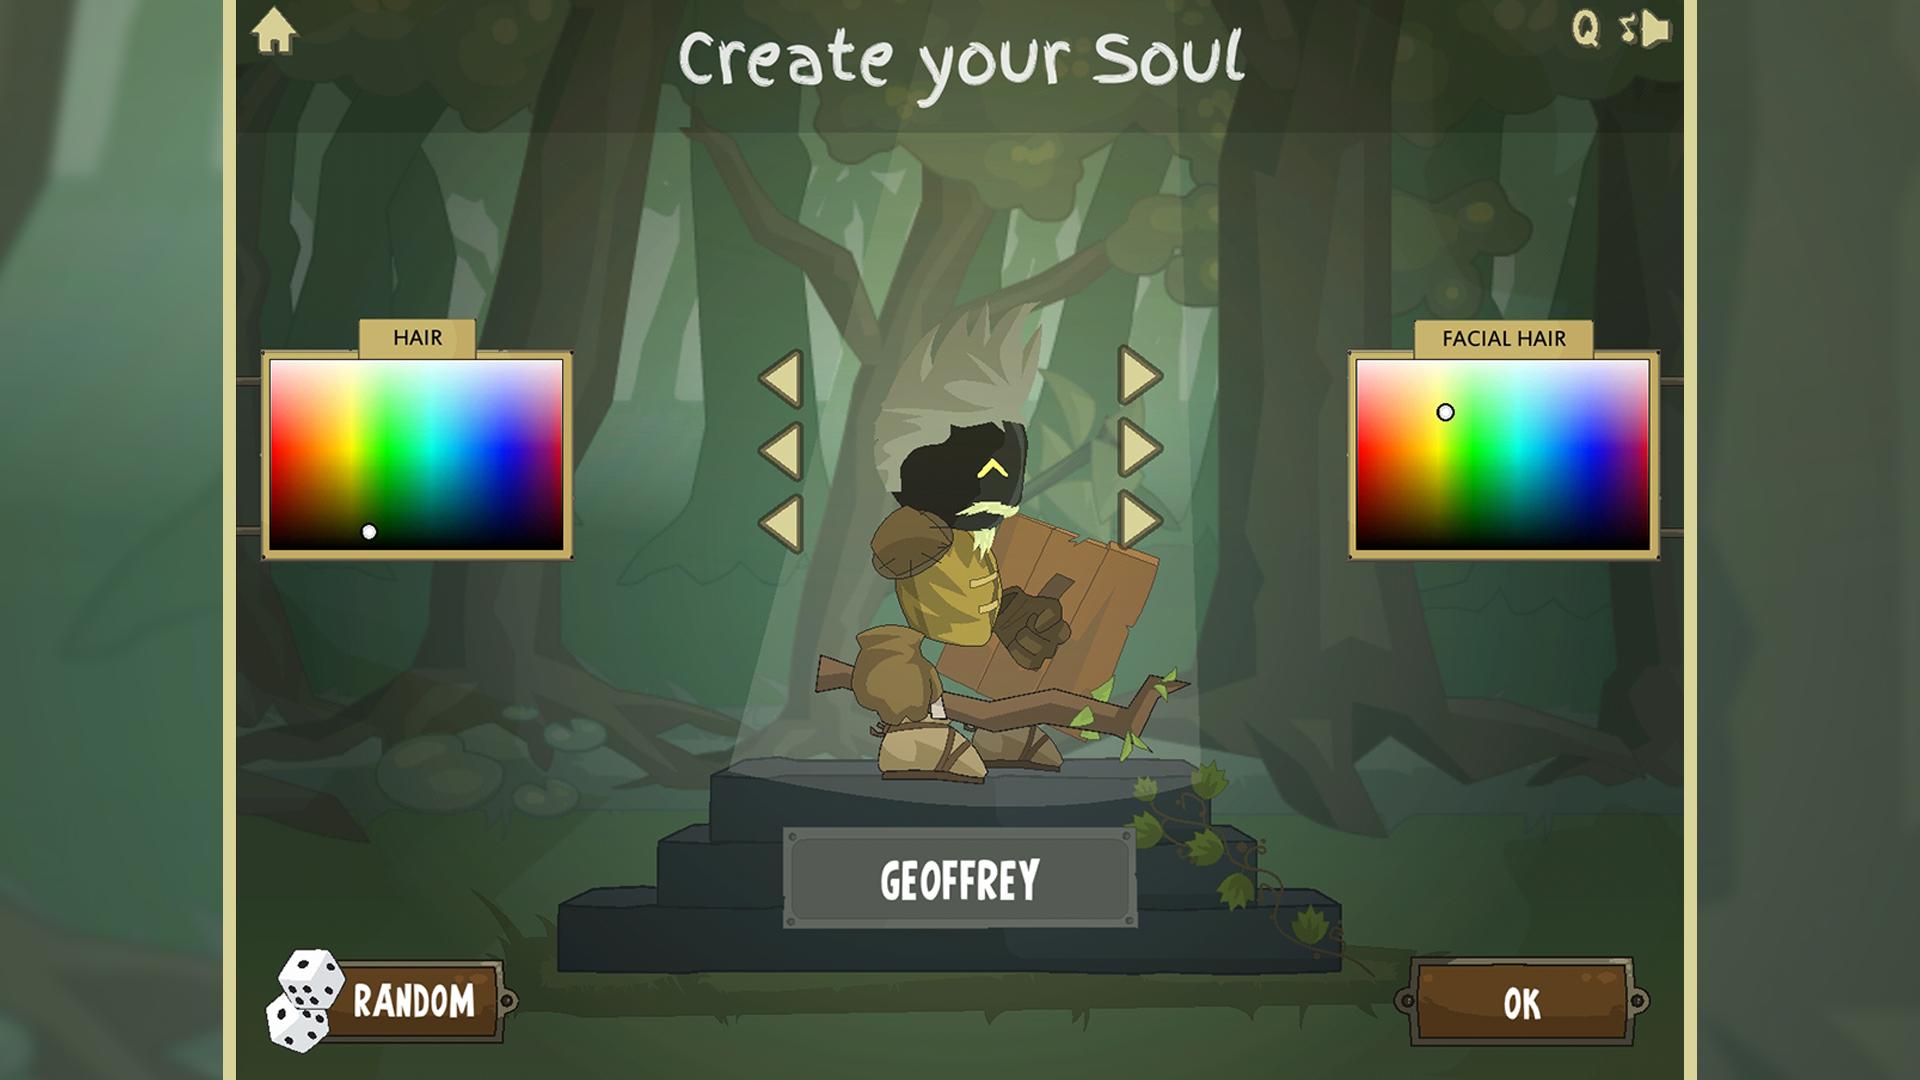 Swords and Souls for Android - APK Download